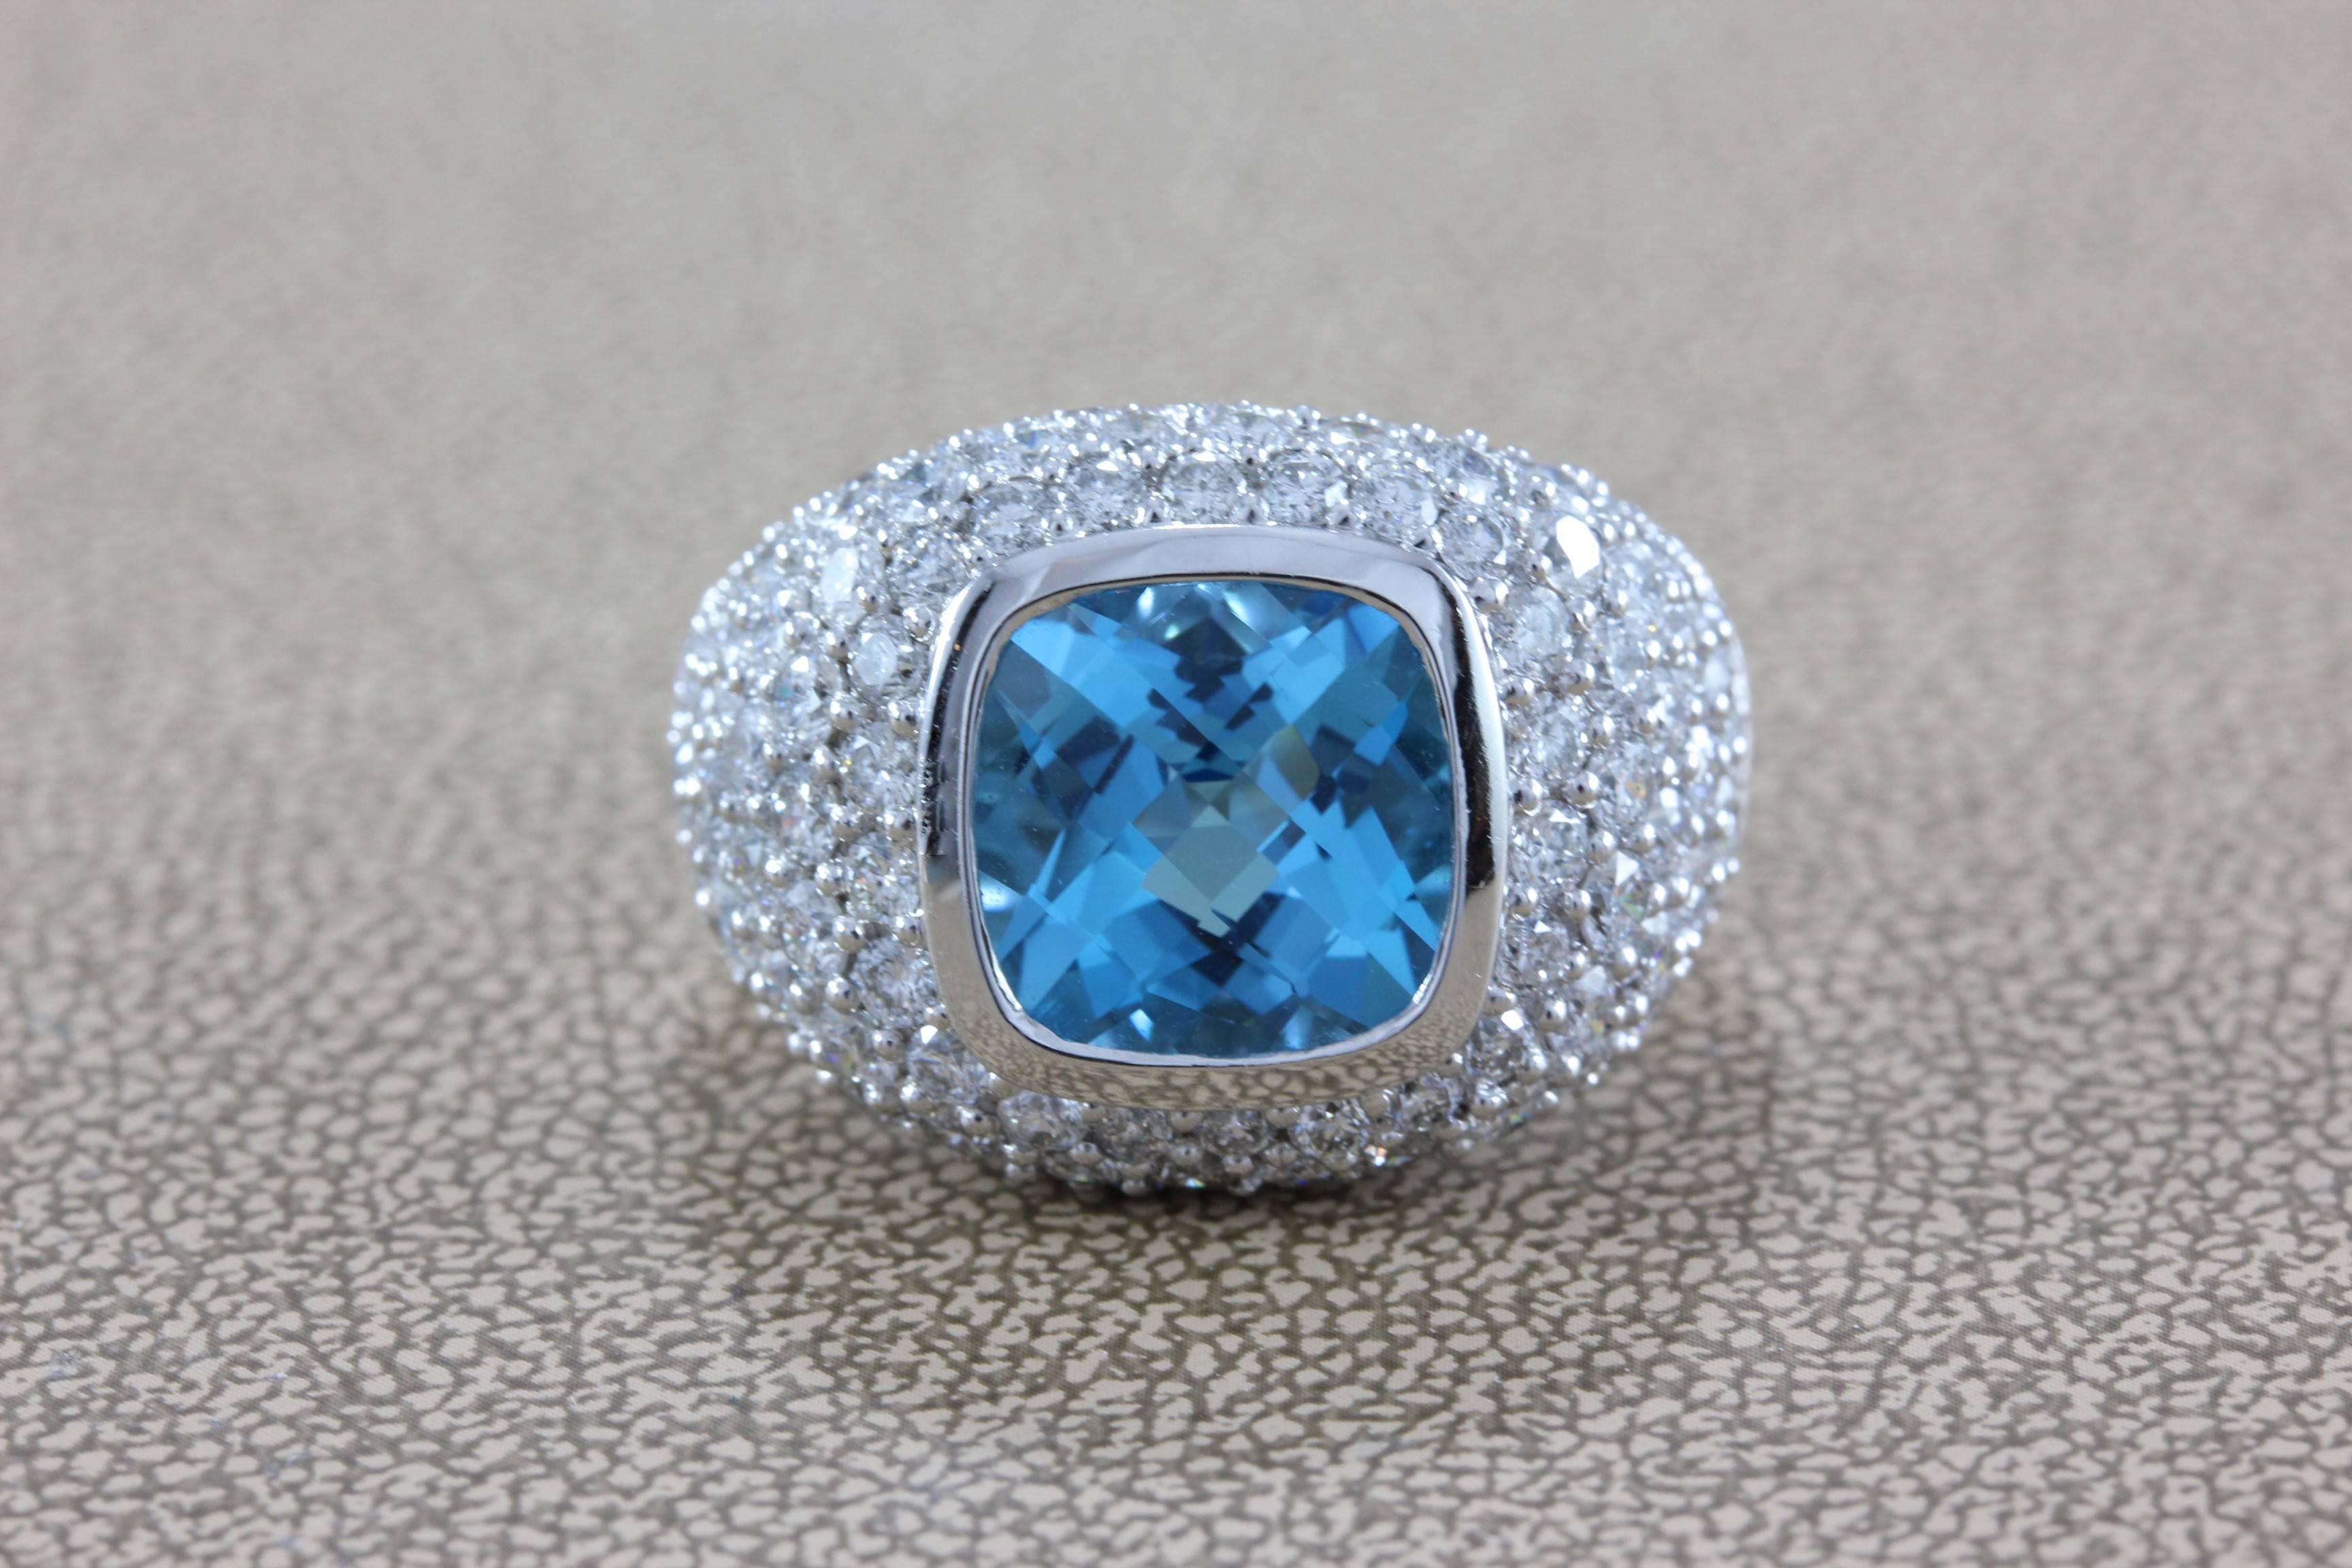 A beautifully designed ring featuring a 4.22 carat cushion cut blue topaz, which is surrounded by almost 3 carats of VS quality round cut diamonds, set in 18K white gold. 

Size 7